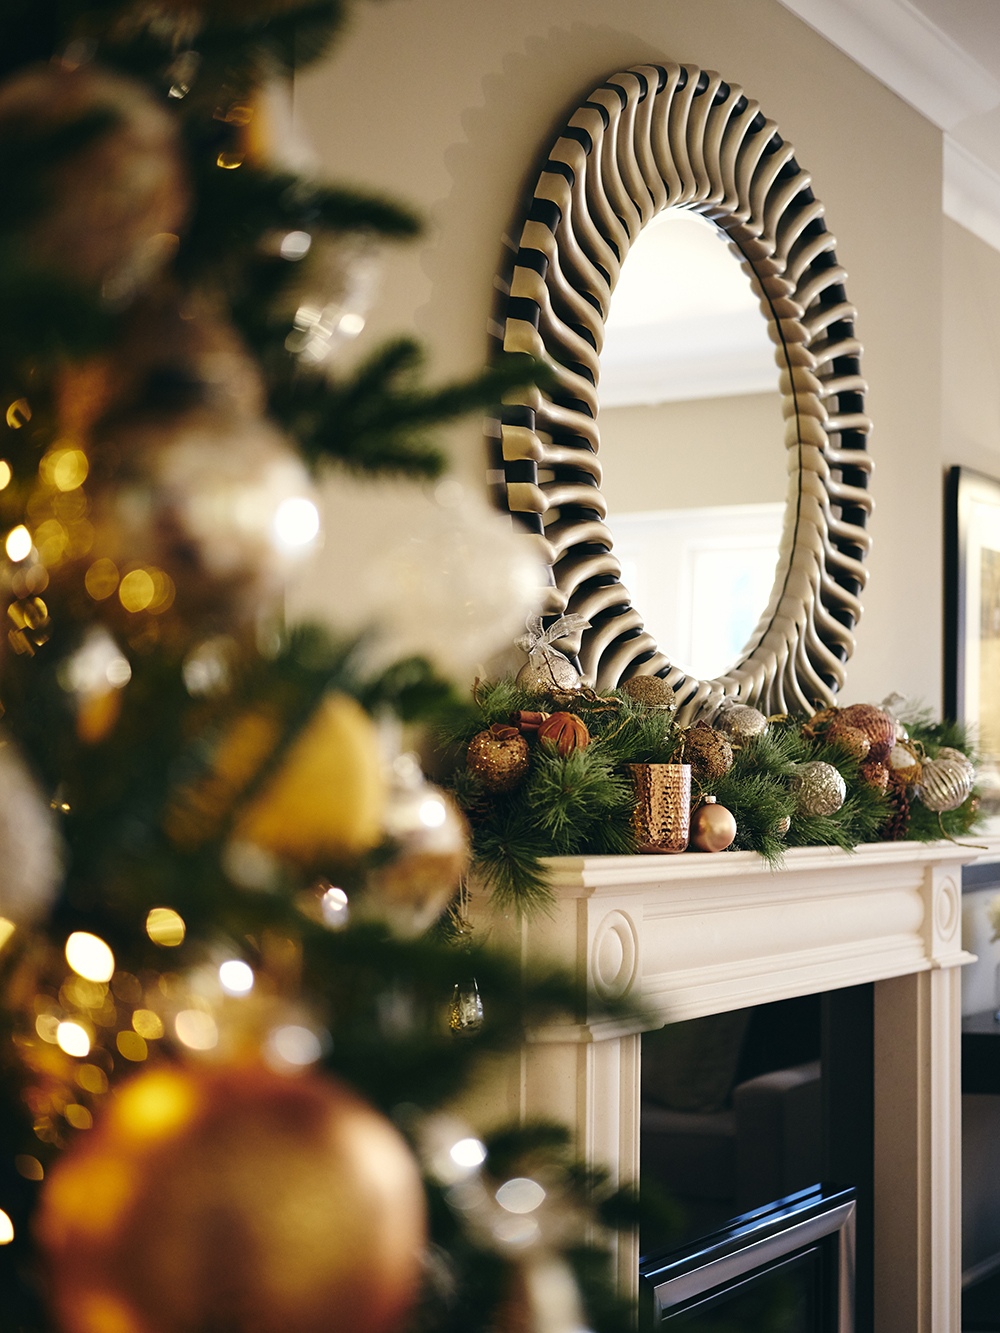 Redrow | Inspiration | A circular mirror above a festive fireplace arrangement, seen behind a Christmas tree in the foreground